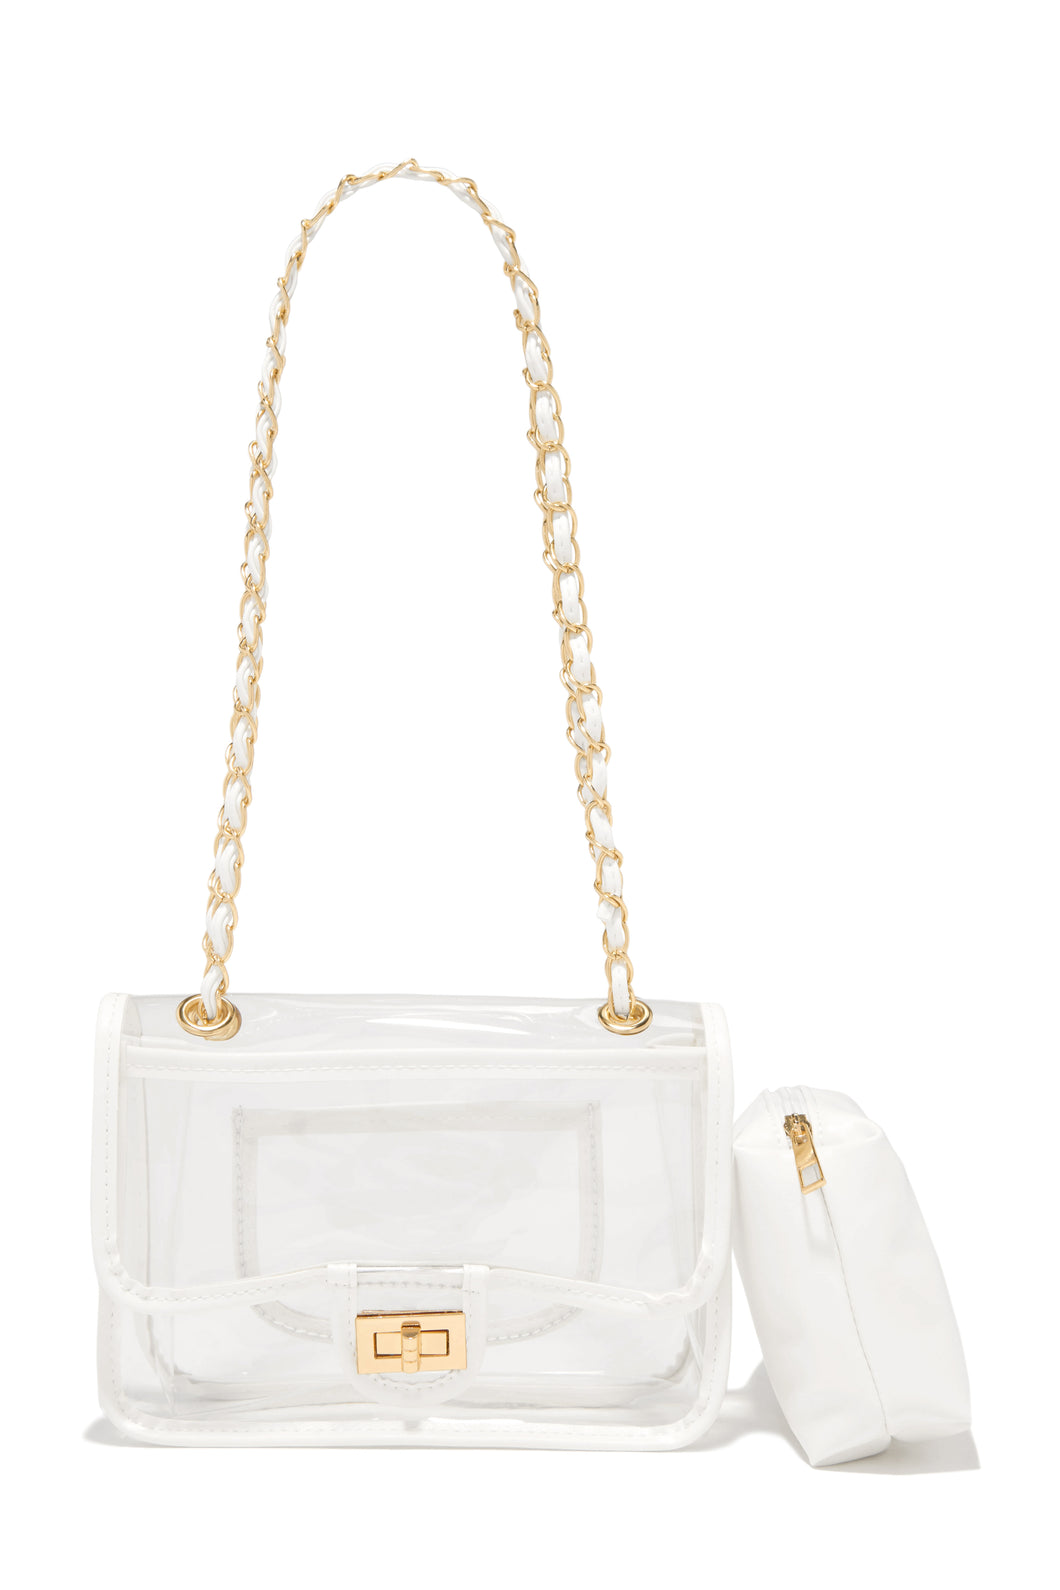 Gold Tone White and Clear Bag